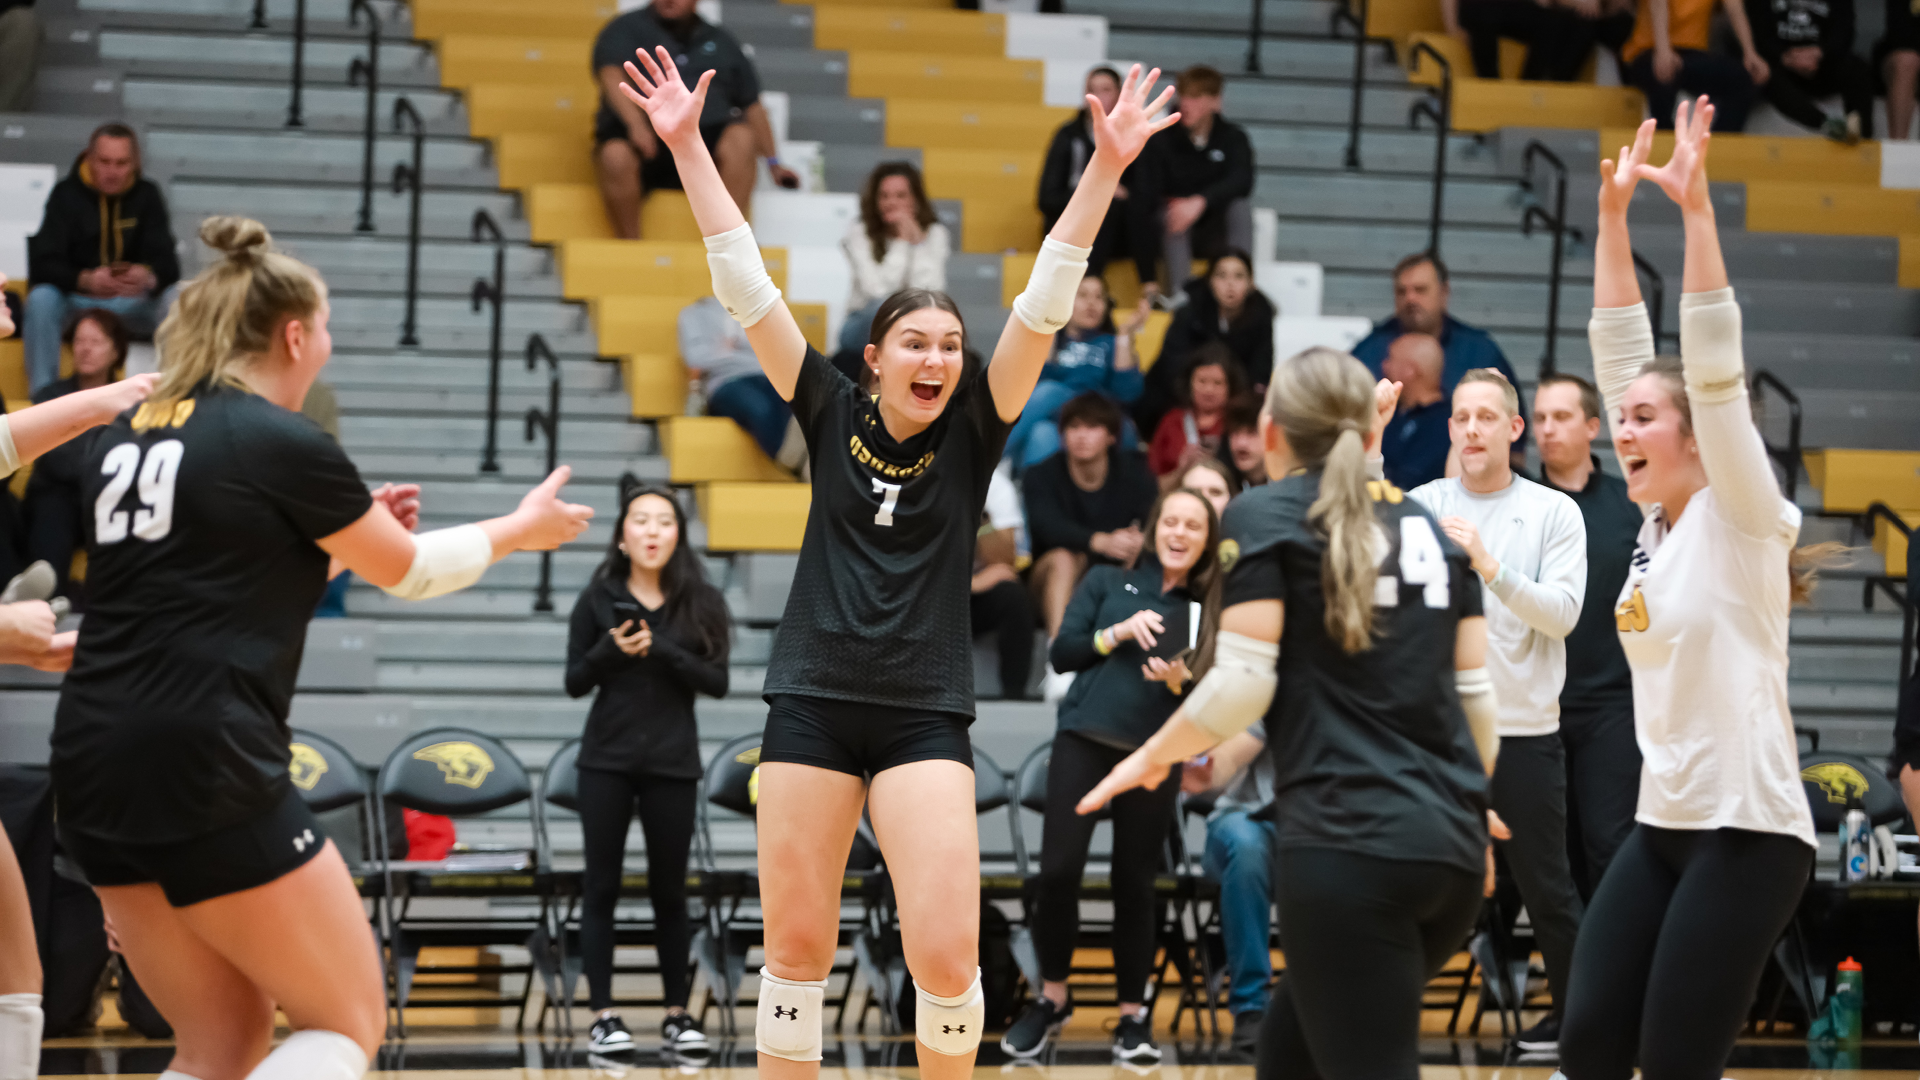 Kalli Mau led the Titans with 20 assists as UW-Oshkosh returned to the WIAC title match for the first time since 2008